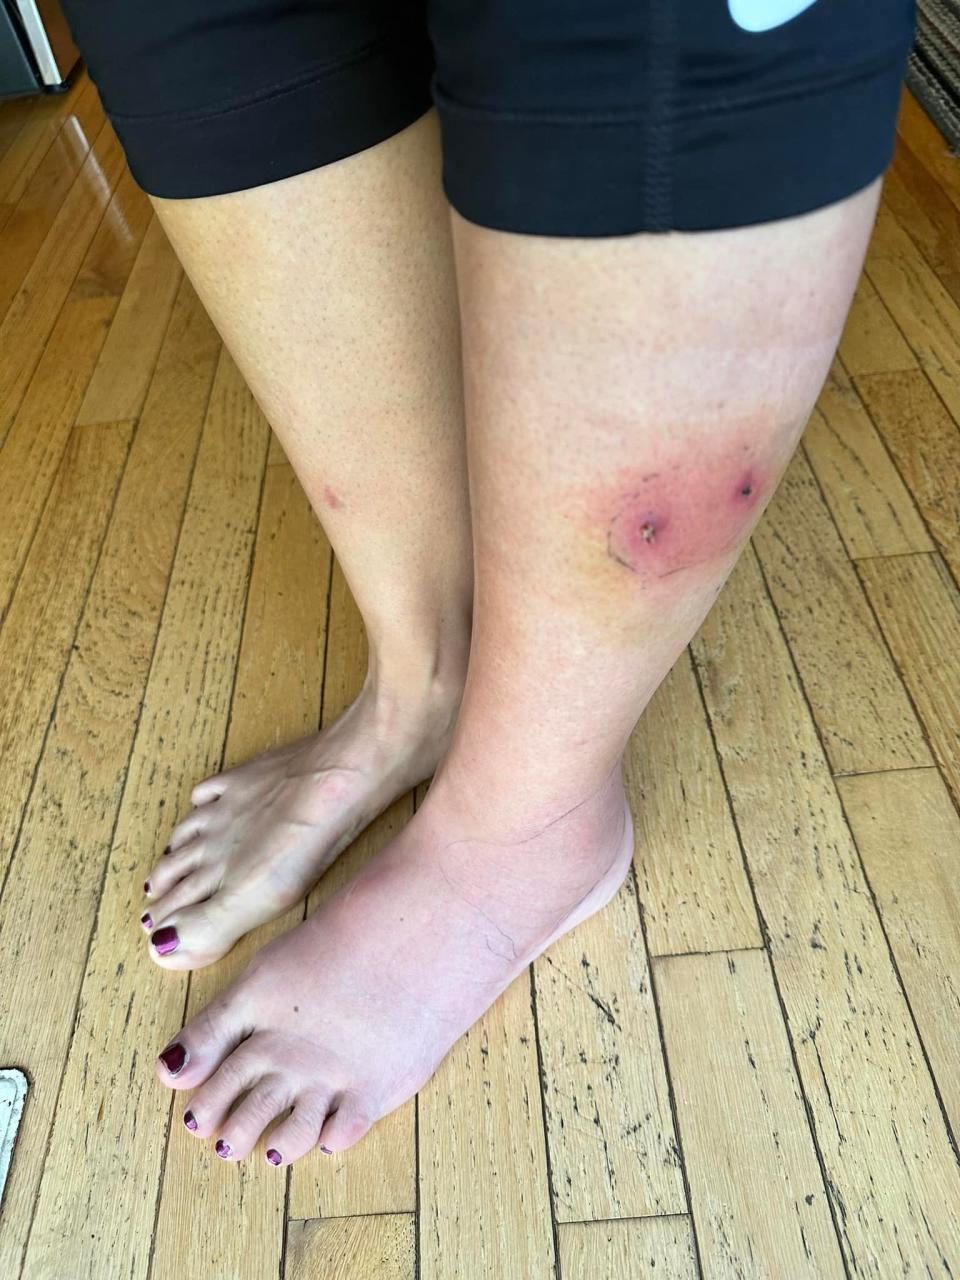 Topeka Kim Teske posted this photo on her personal Facebook page showing an injury she received when a dog bit her as she rode her bicycle on the Shunga Trail in East Topeka.